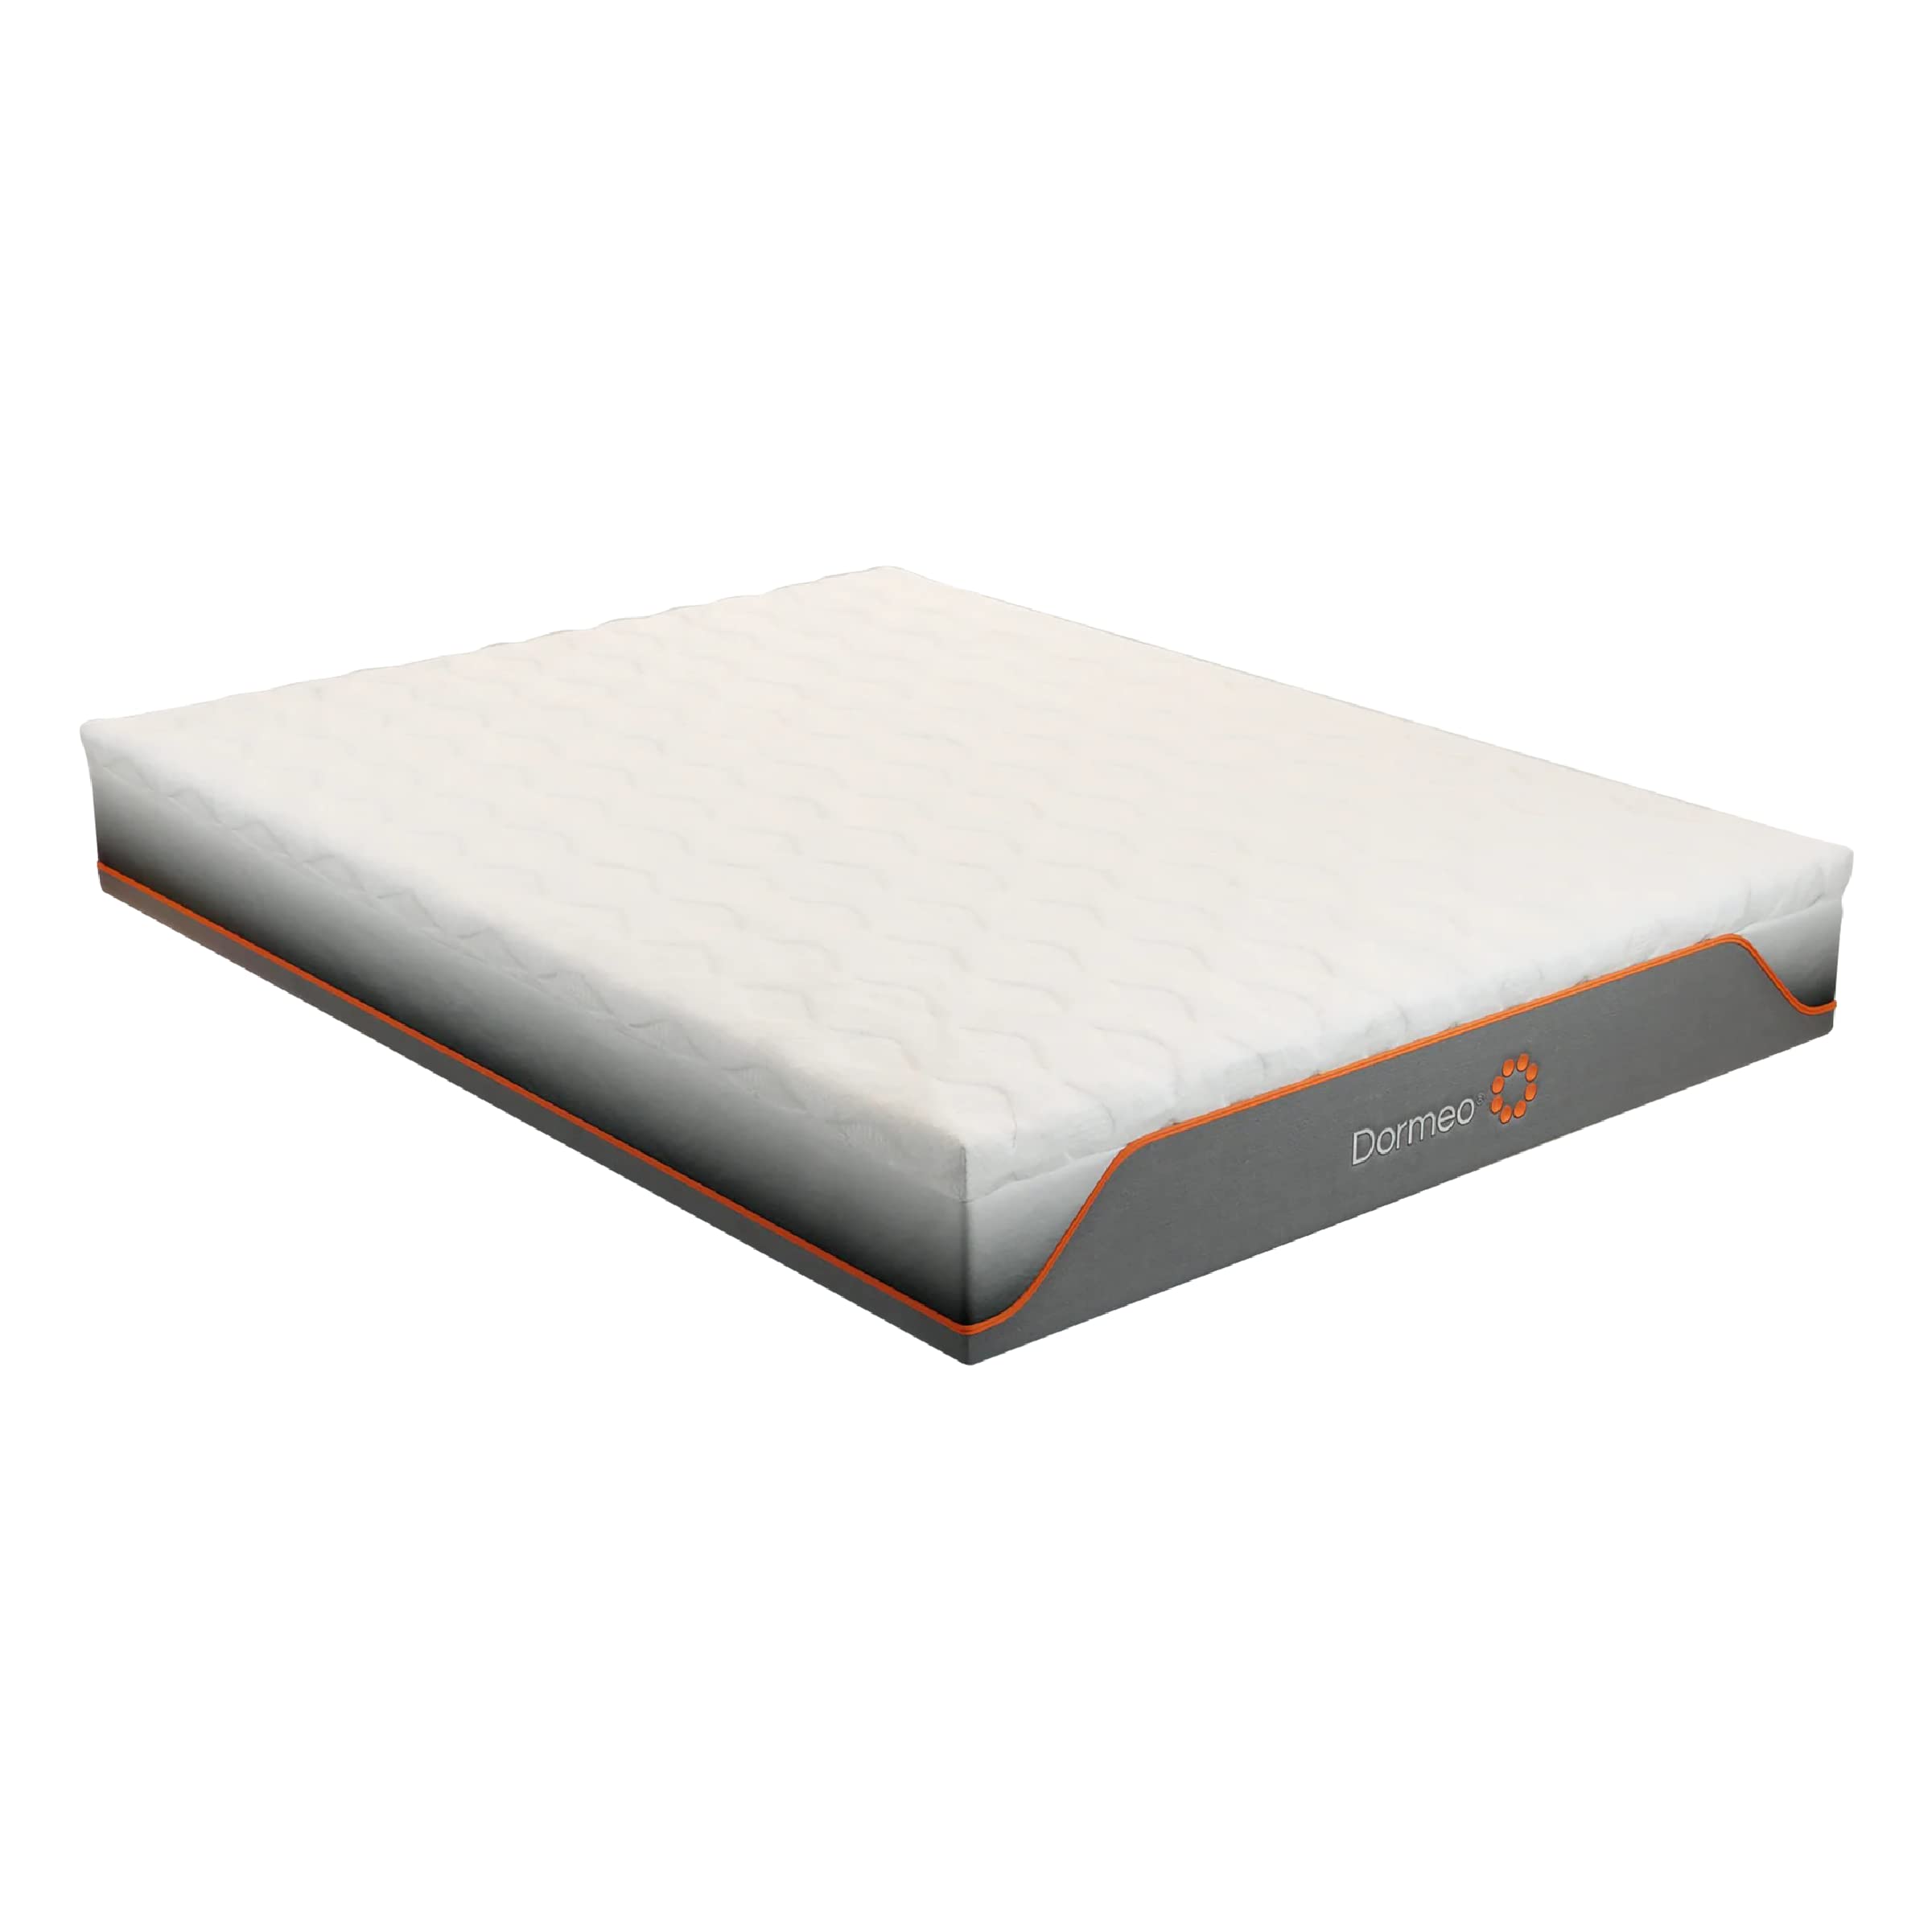 Dormeo Recovery 10 Queen Mattress with Signature Recovery Foam and Pressure Relieving Octaspring Technology, Medium Feel Queen S